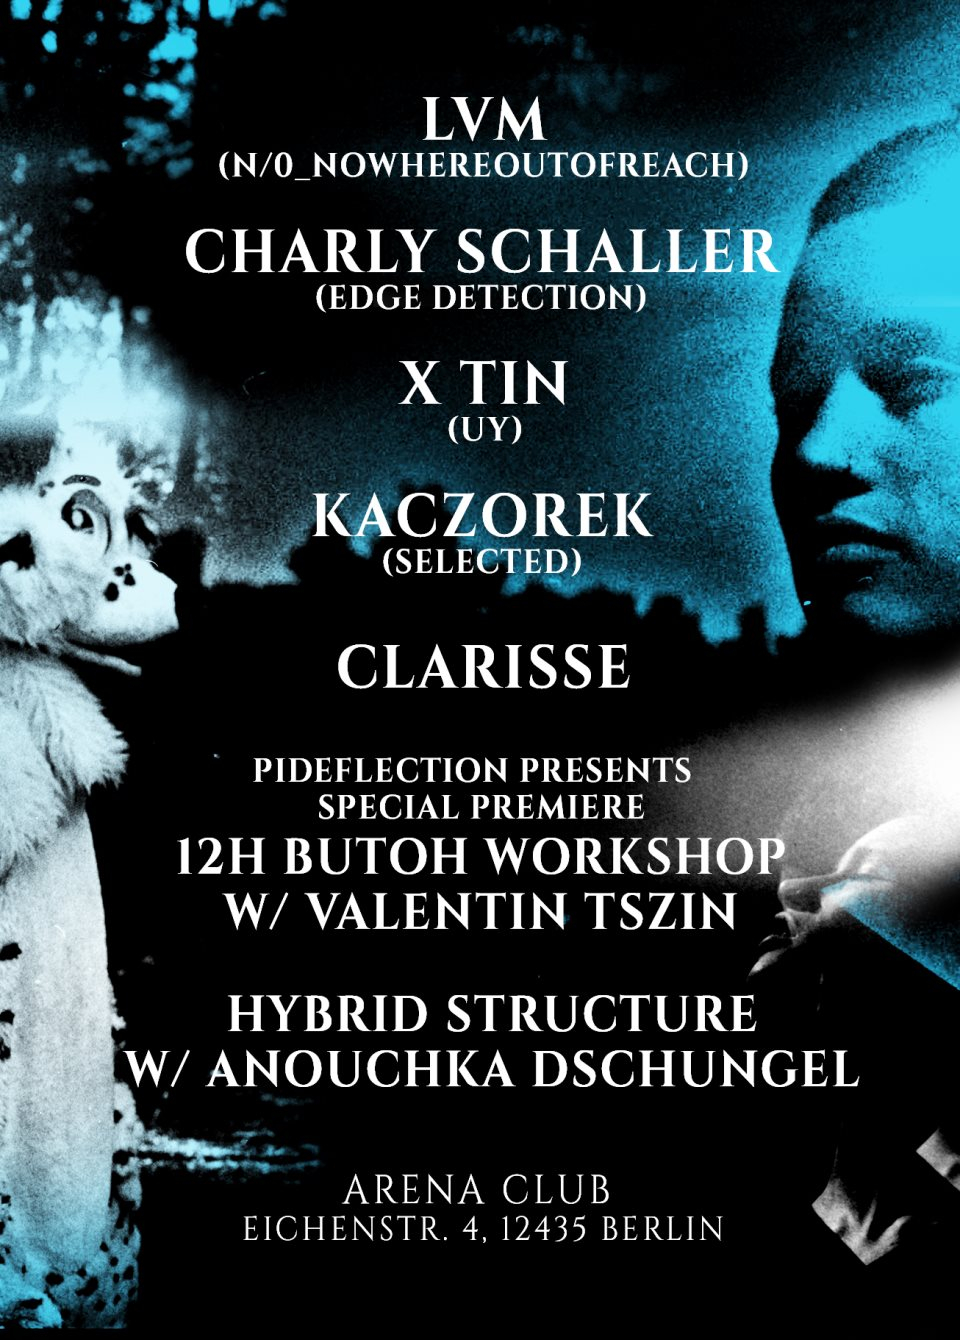 Strictly Forbidden with LVM, Charly Schaller, X tin & More - Flyer back